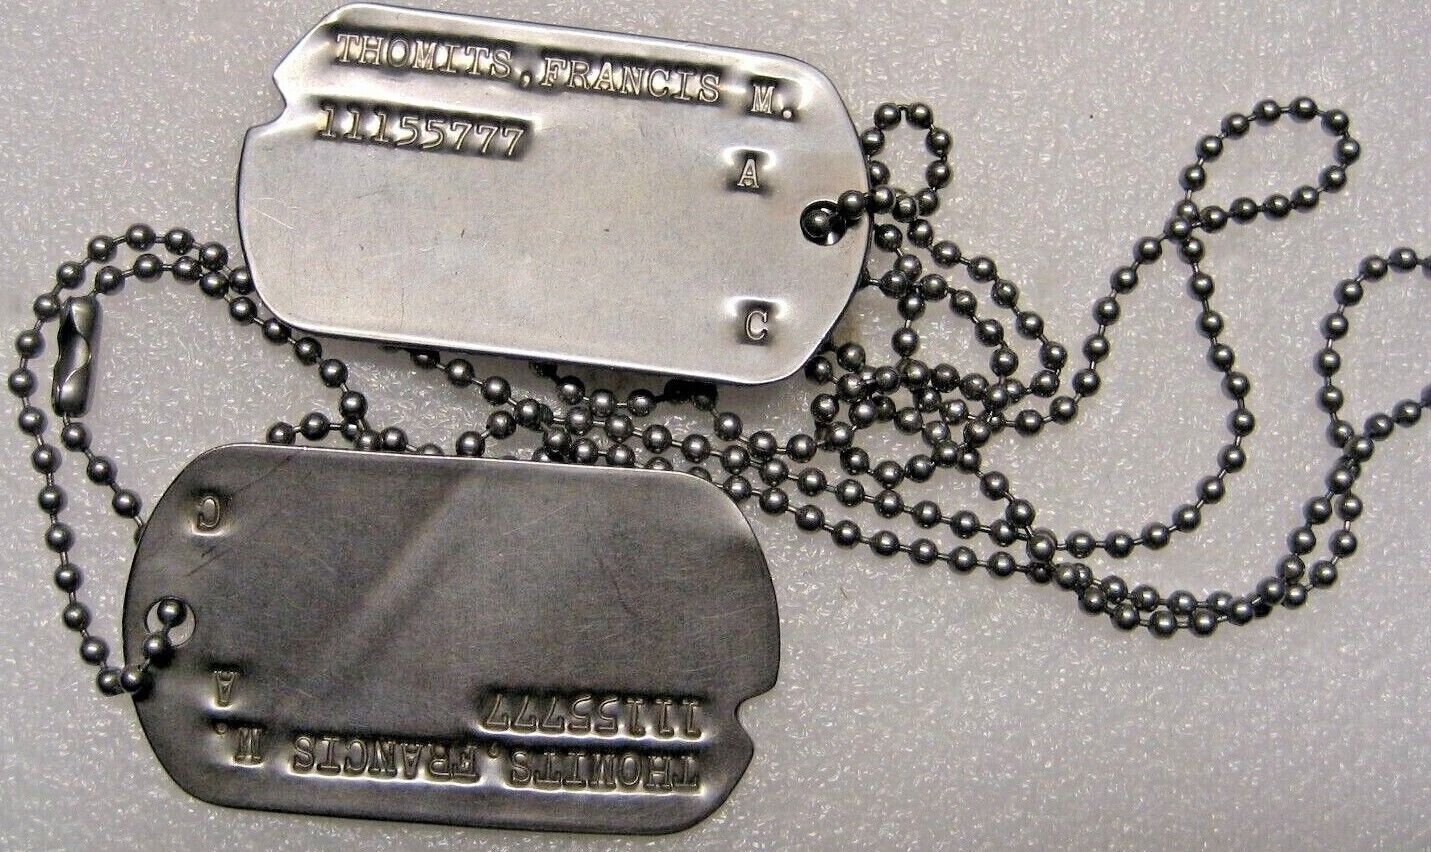 /us Military Id Dog Tag,set,with Chain